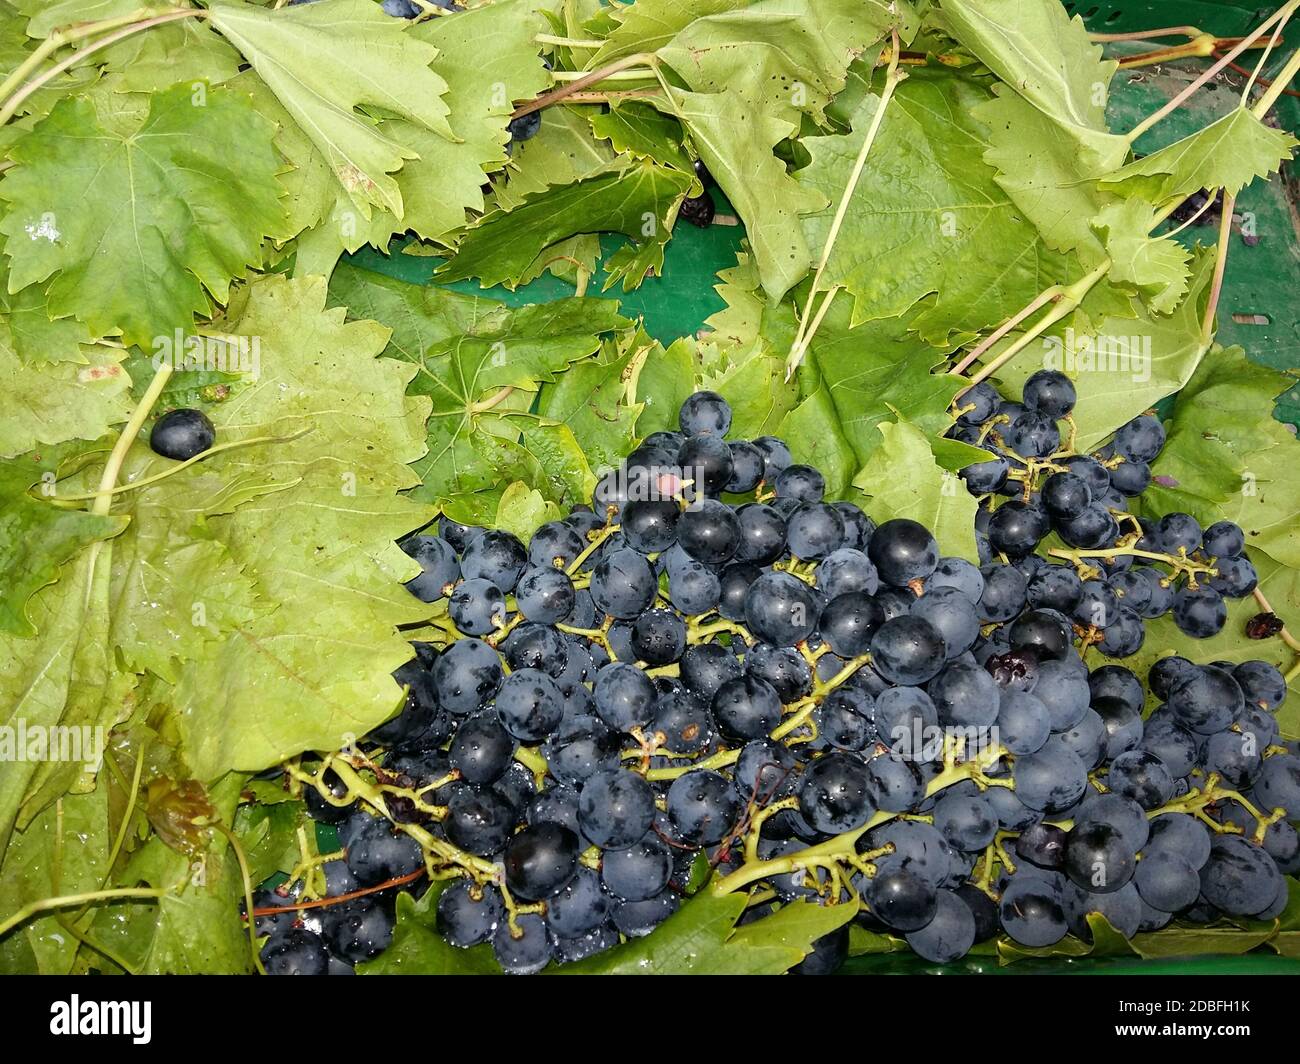 Market stall with freshly picked blue grapes on vine leaves Stock Photo